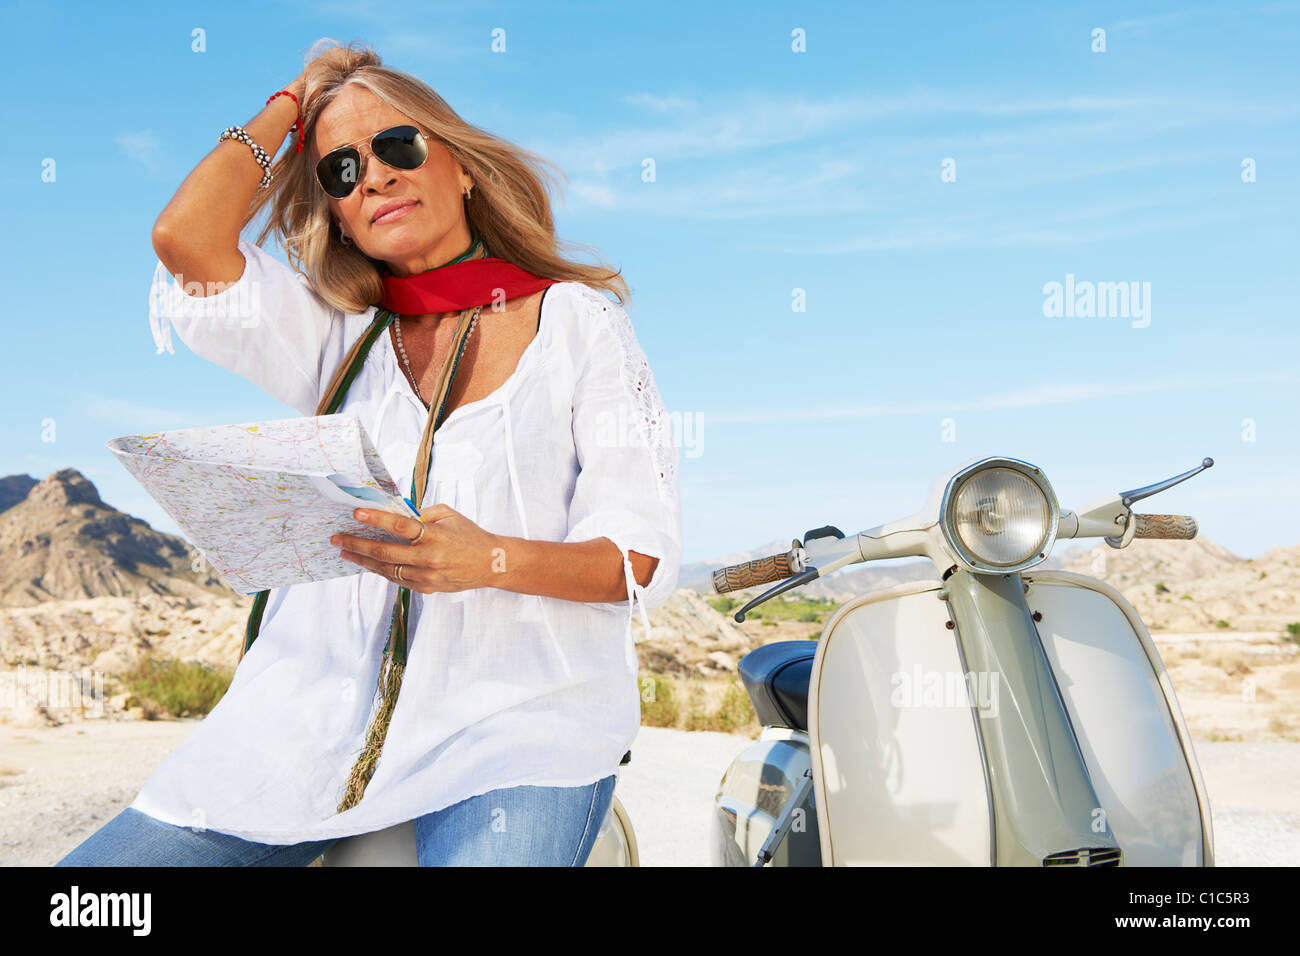 Woman sitting on motorbike with map Stock Photo